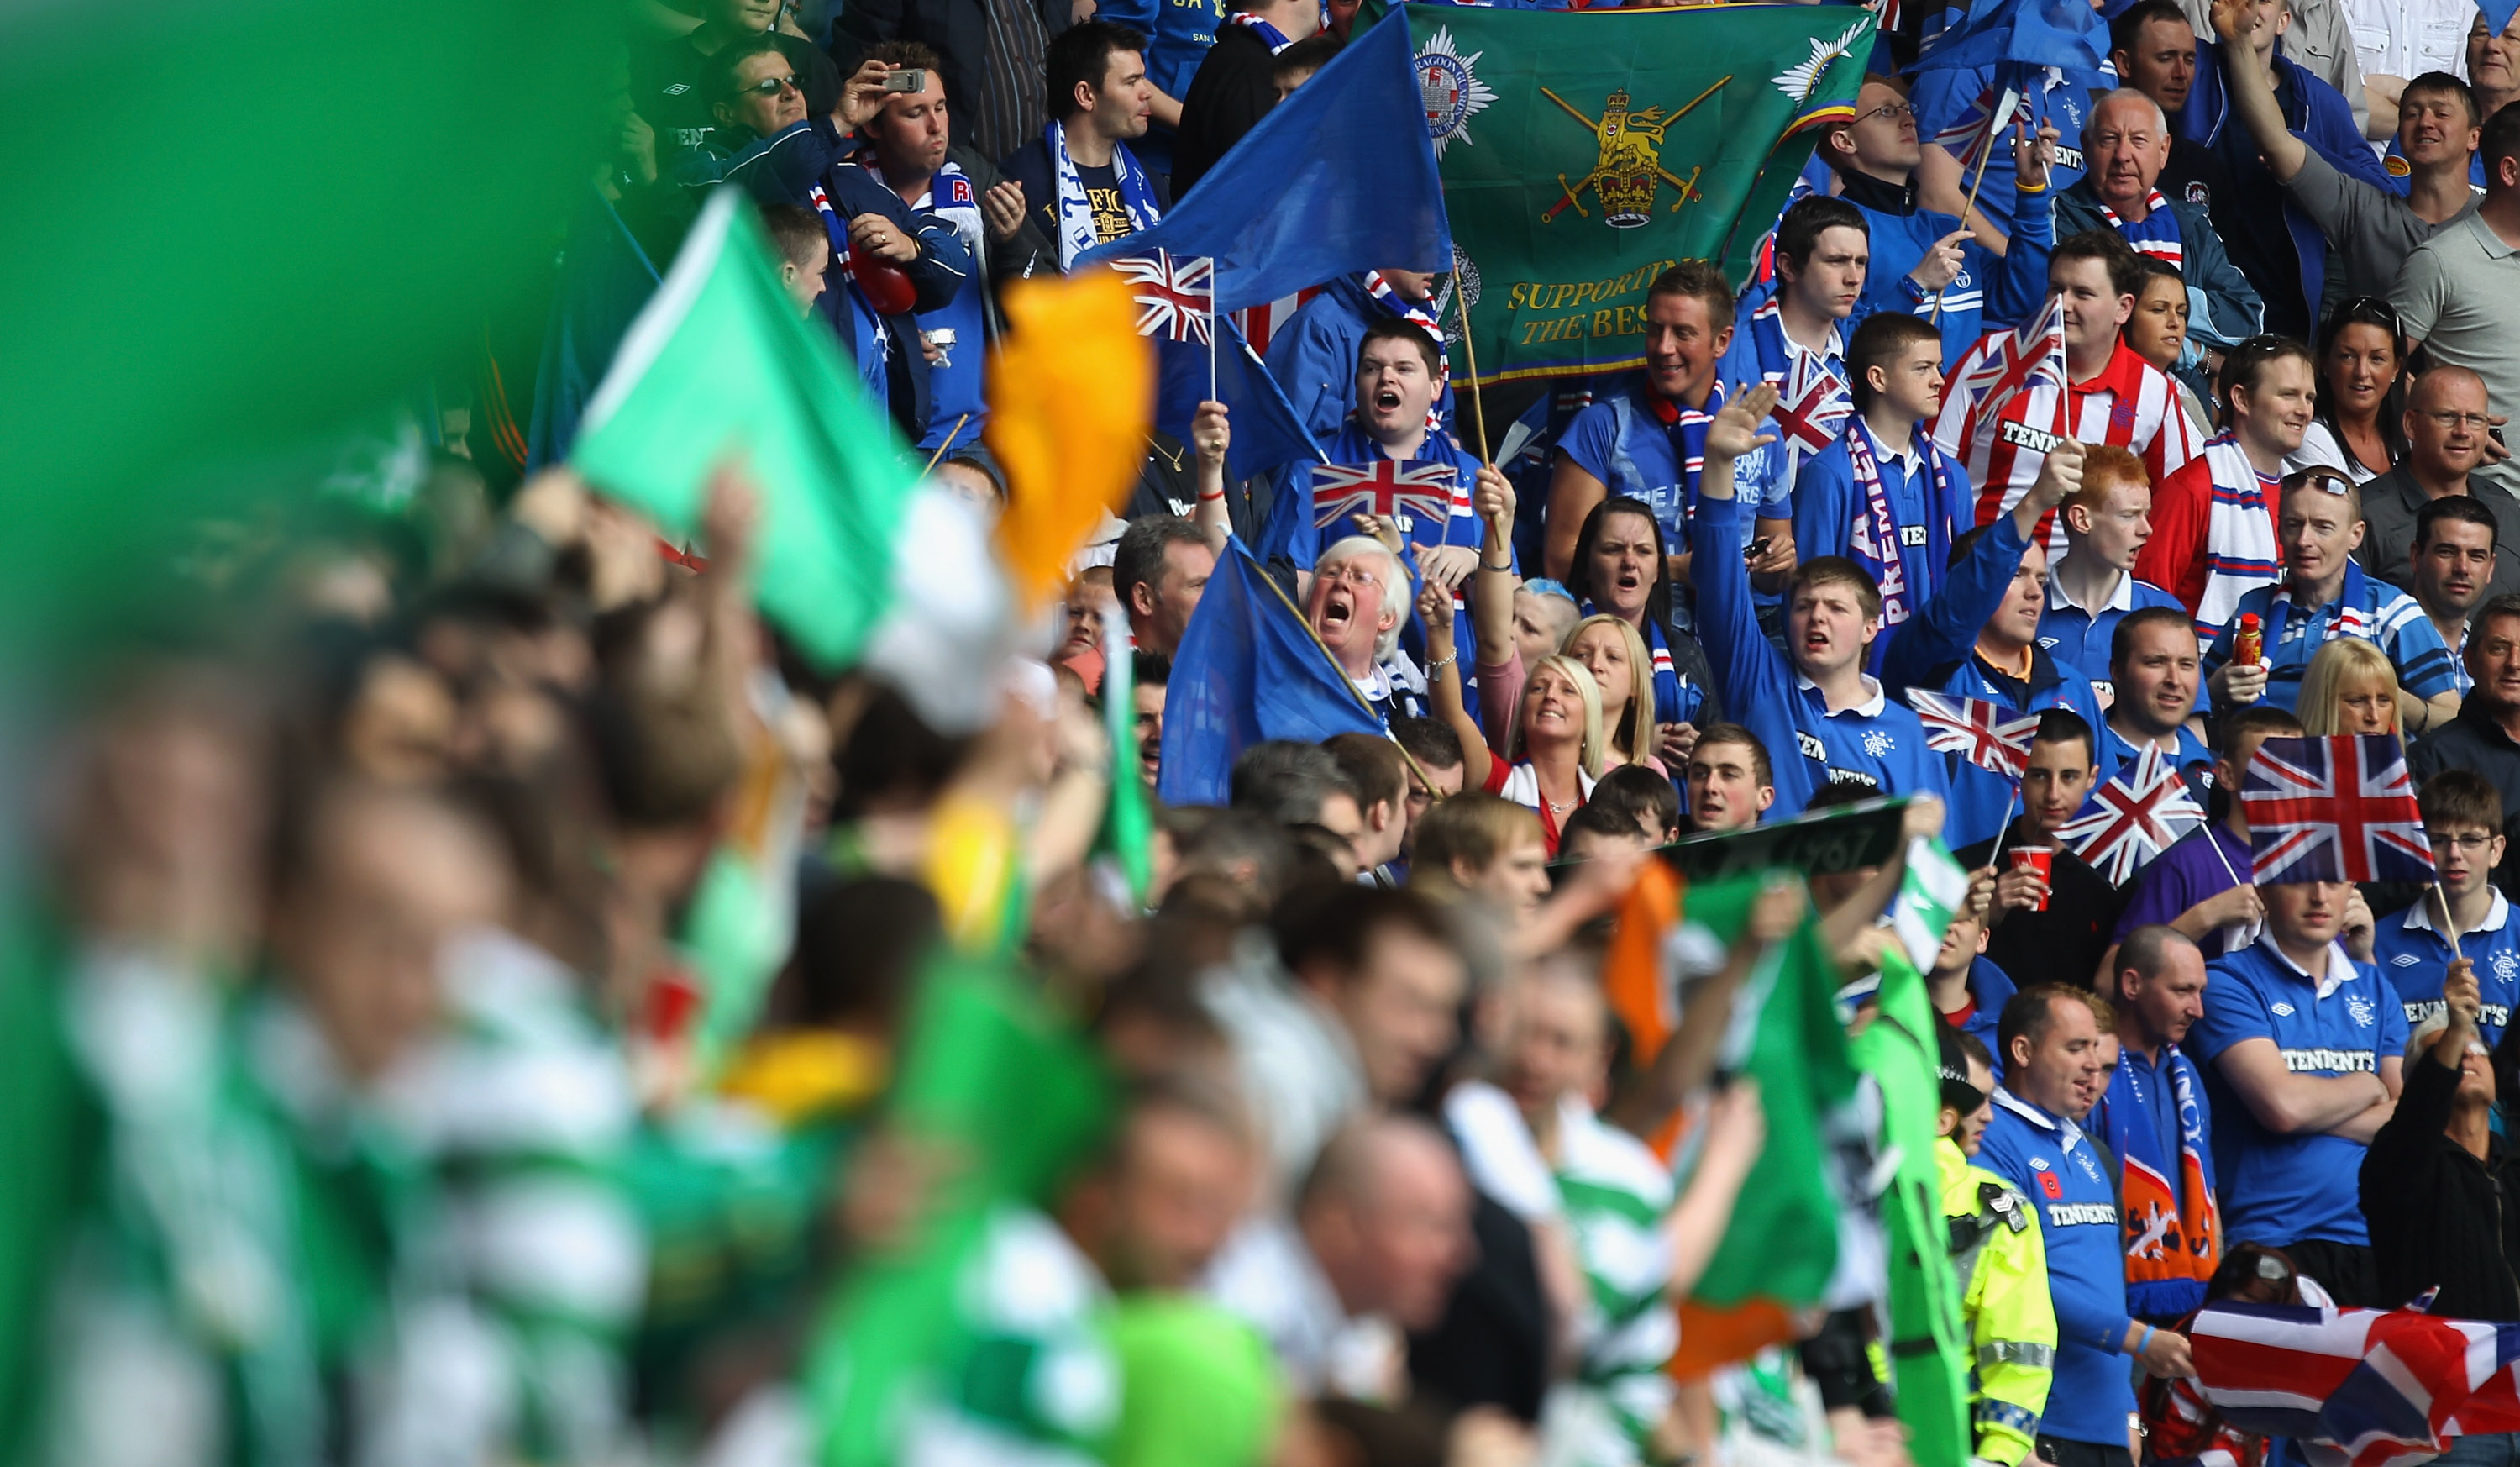 GLASGOW, SCOTLAND - APRIL 24:  Rangers and Celtic supporters chant before the Clydesdale Bank Premier League match between Rangers and Celtic at Ibrox Stadium on April 24, 2011 in Glasgow, Scotland.  (Photo by Jeff J Mitchell/Getty Images)